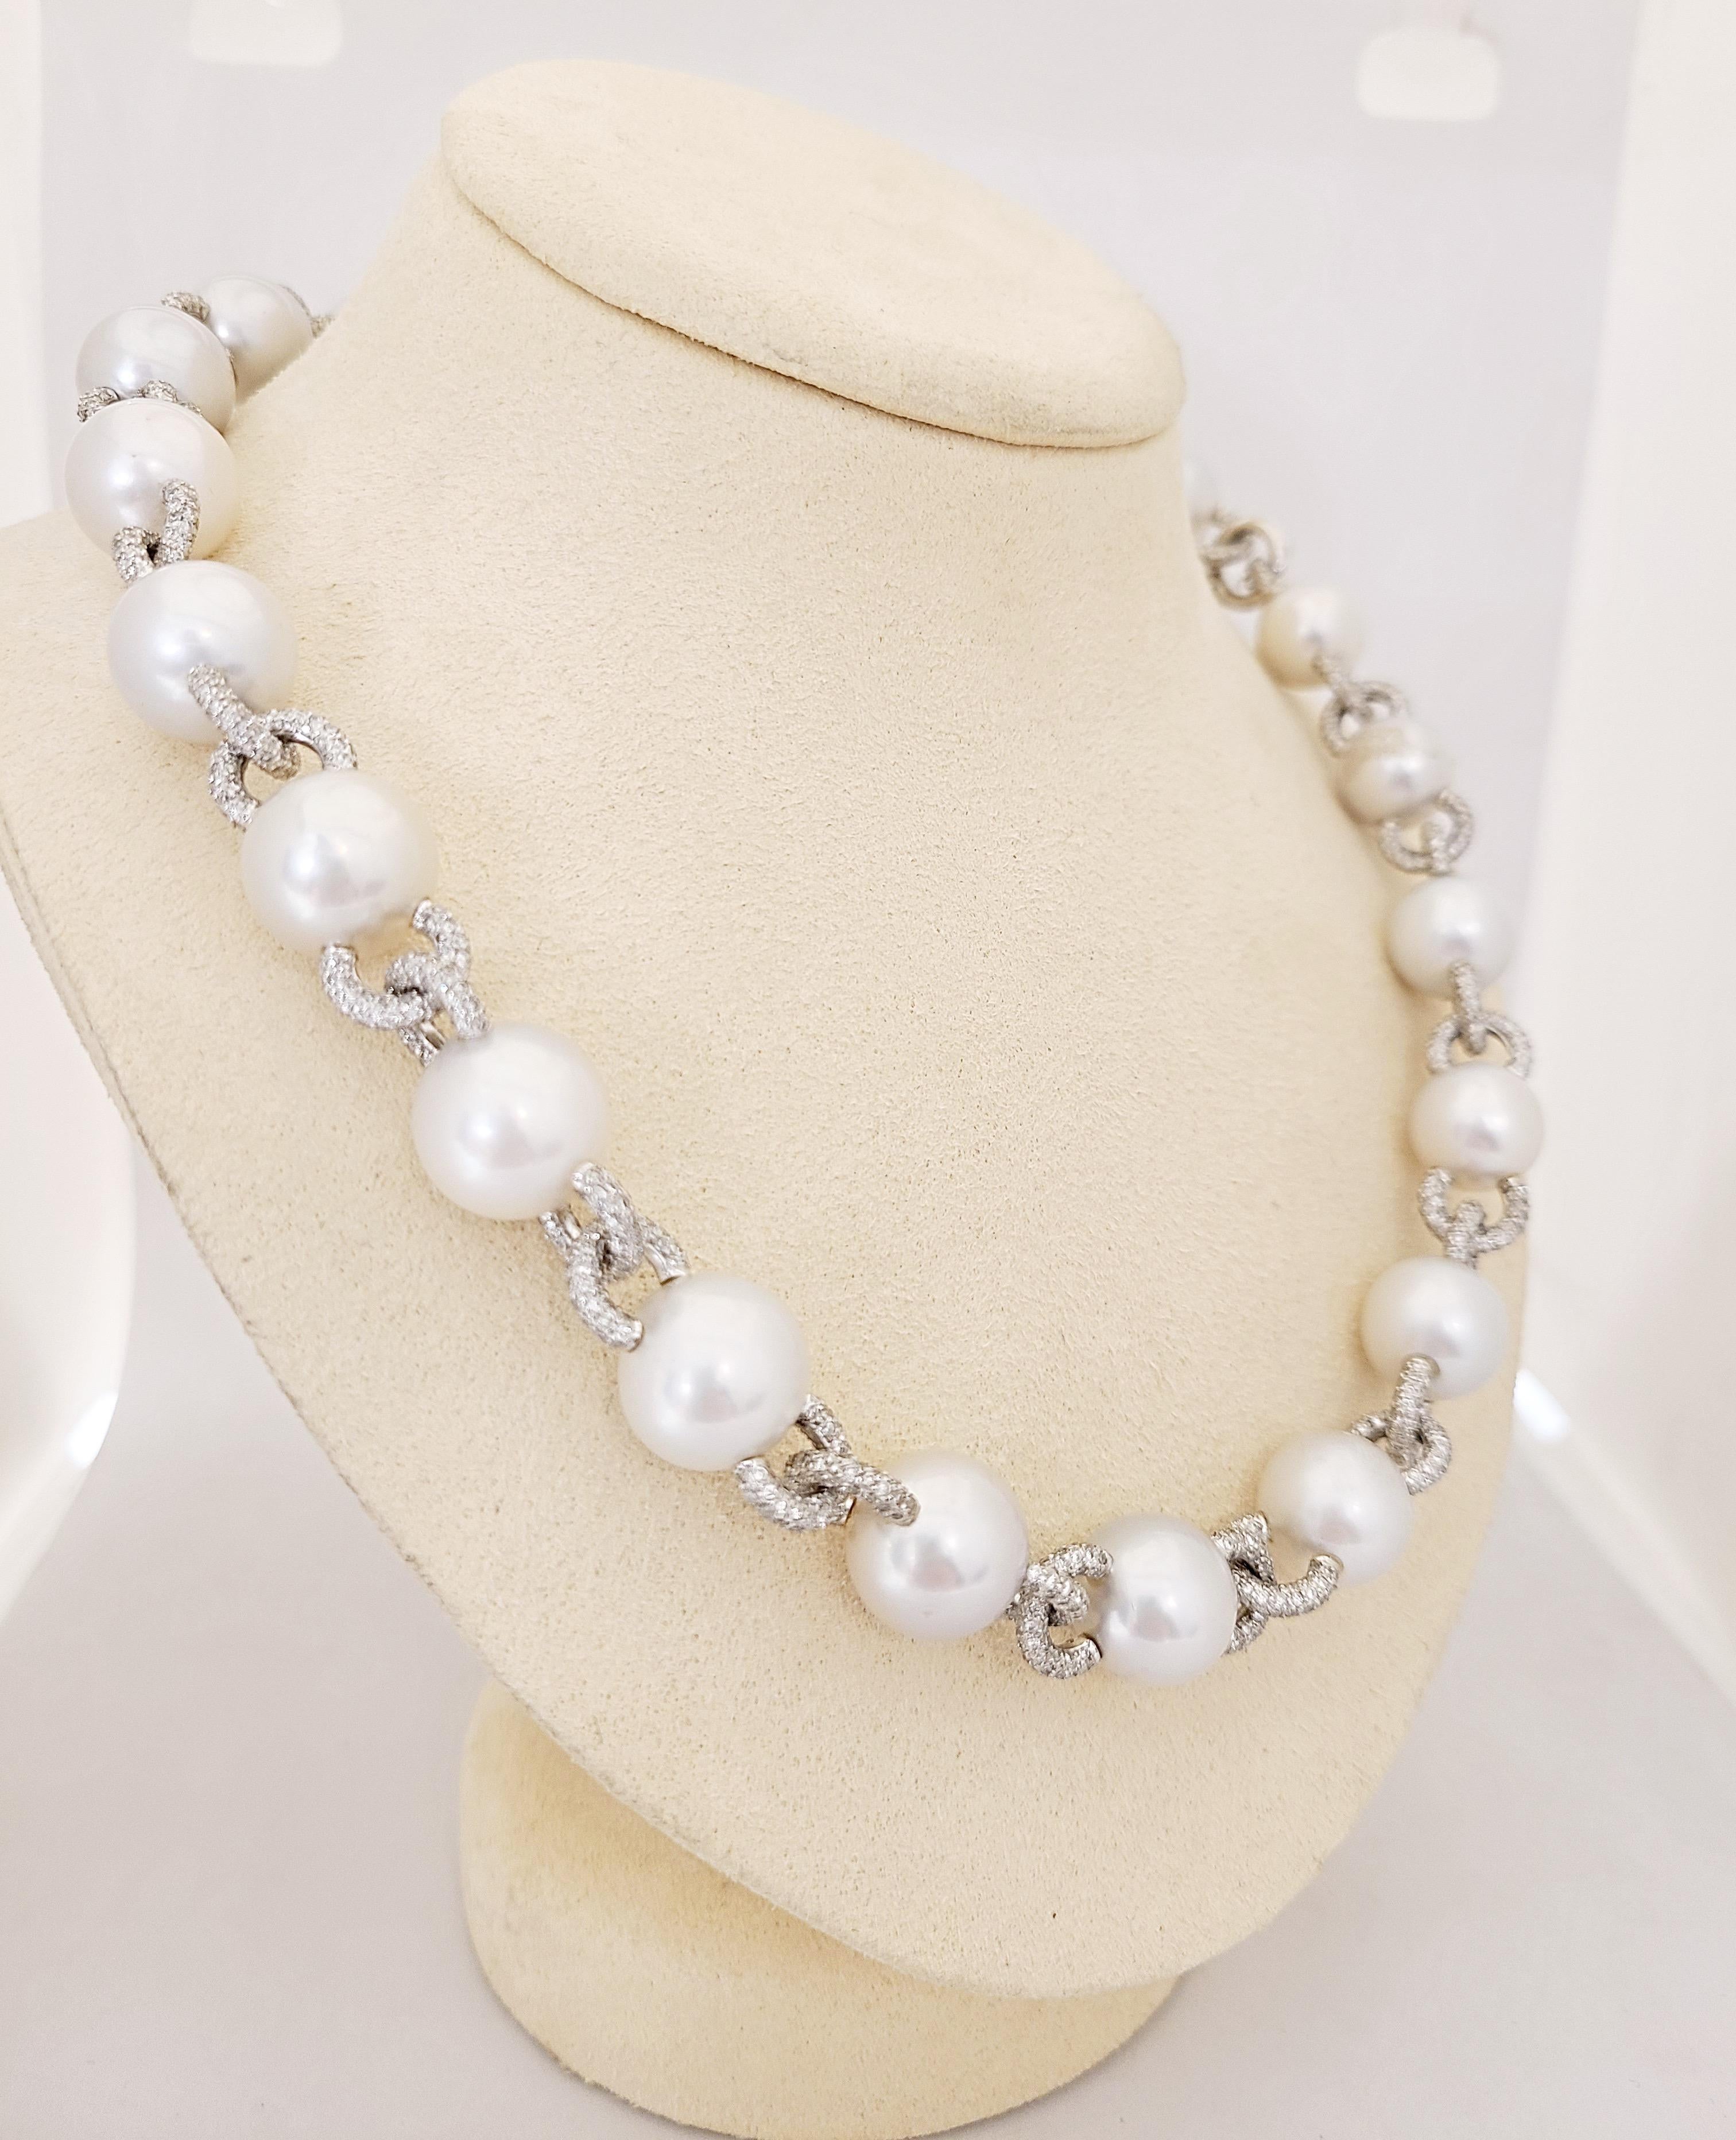 A very classic and wearable pearl and diamond necklace. The necklace is designed with 22 South Sea Pearls 12.5mm x 11.6 mm. The pearls are connected by 18 karat white gold diamond pave links. The combination of links and pearls joins together a